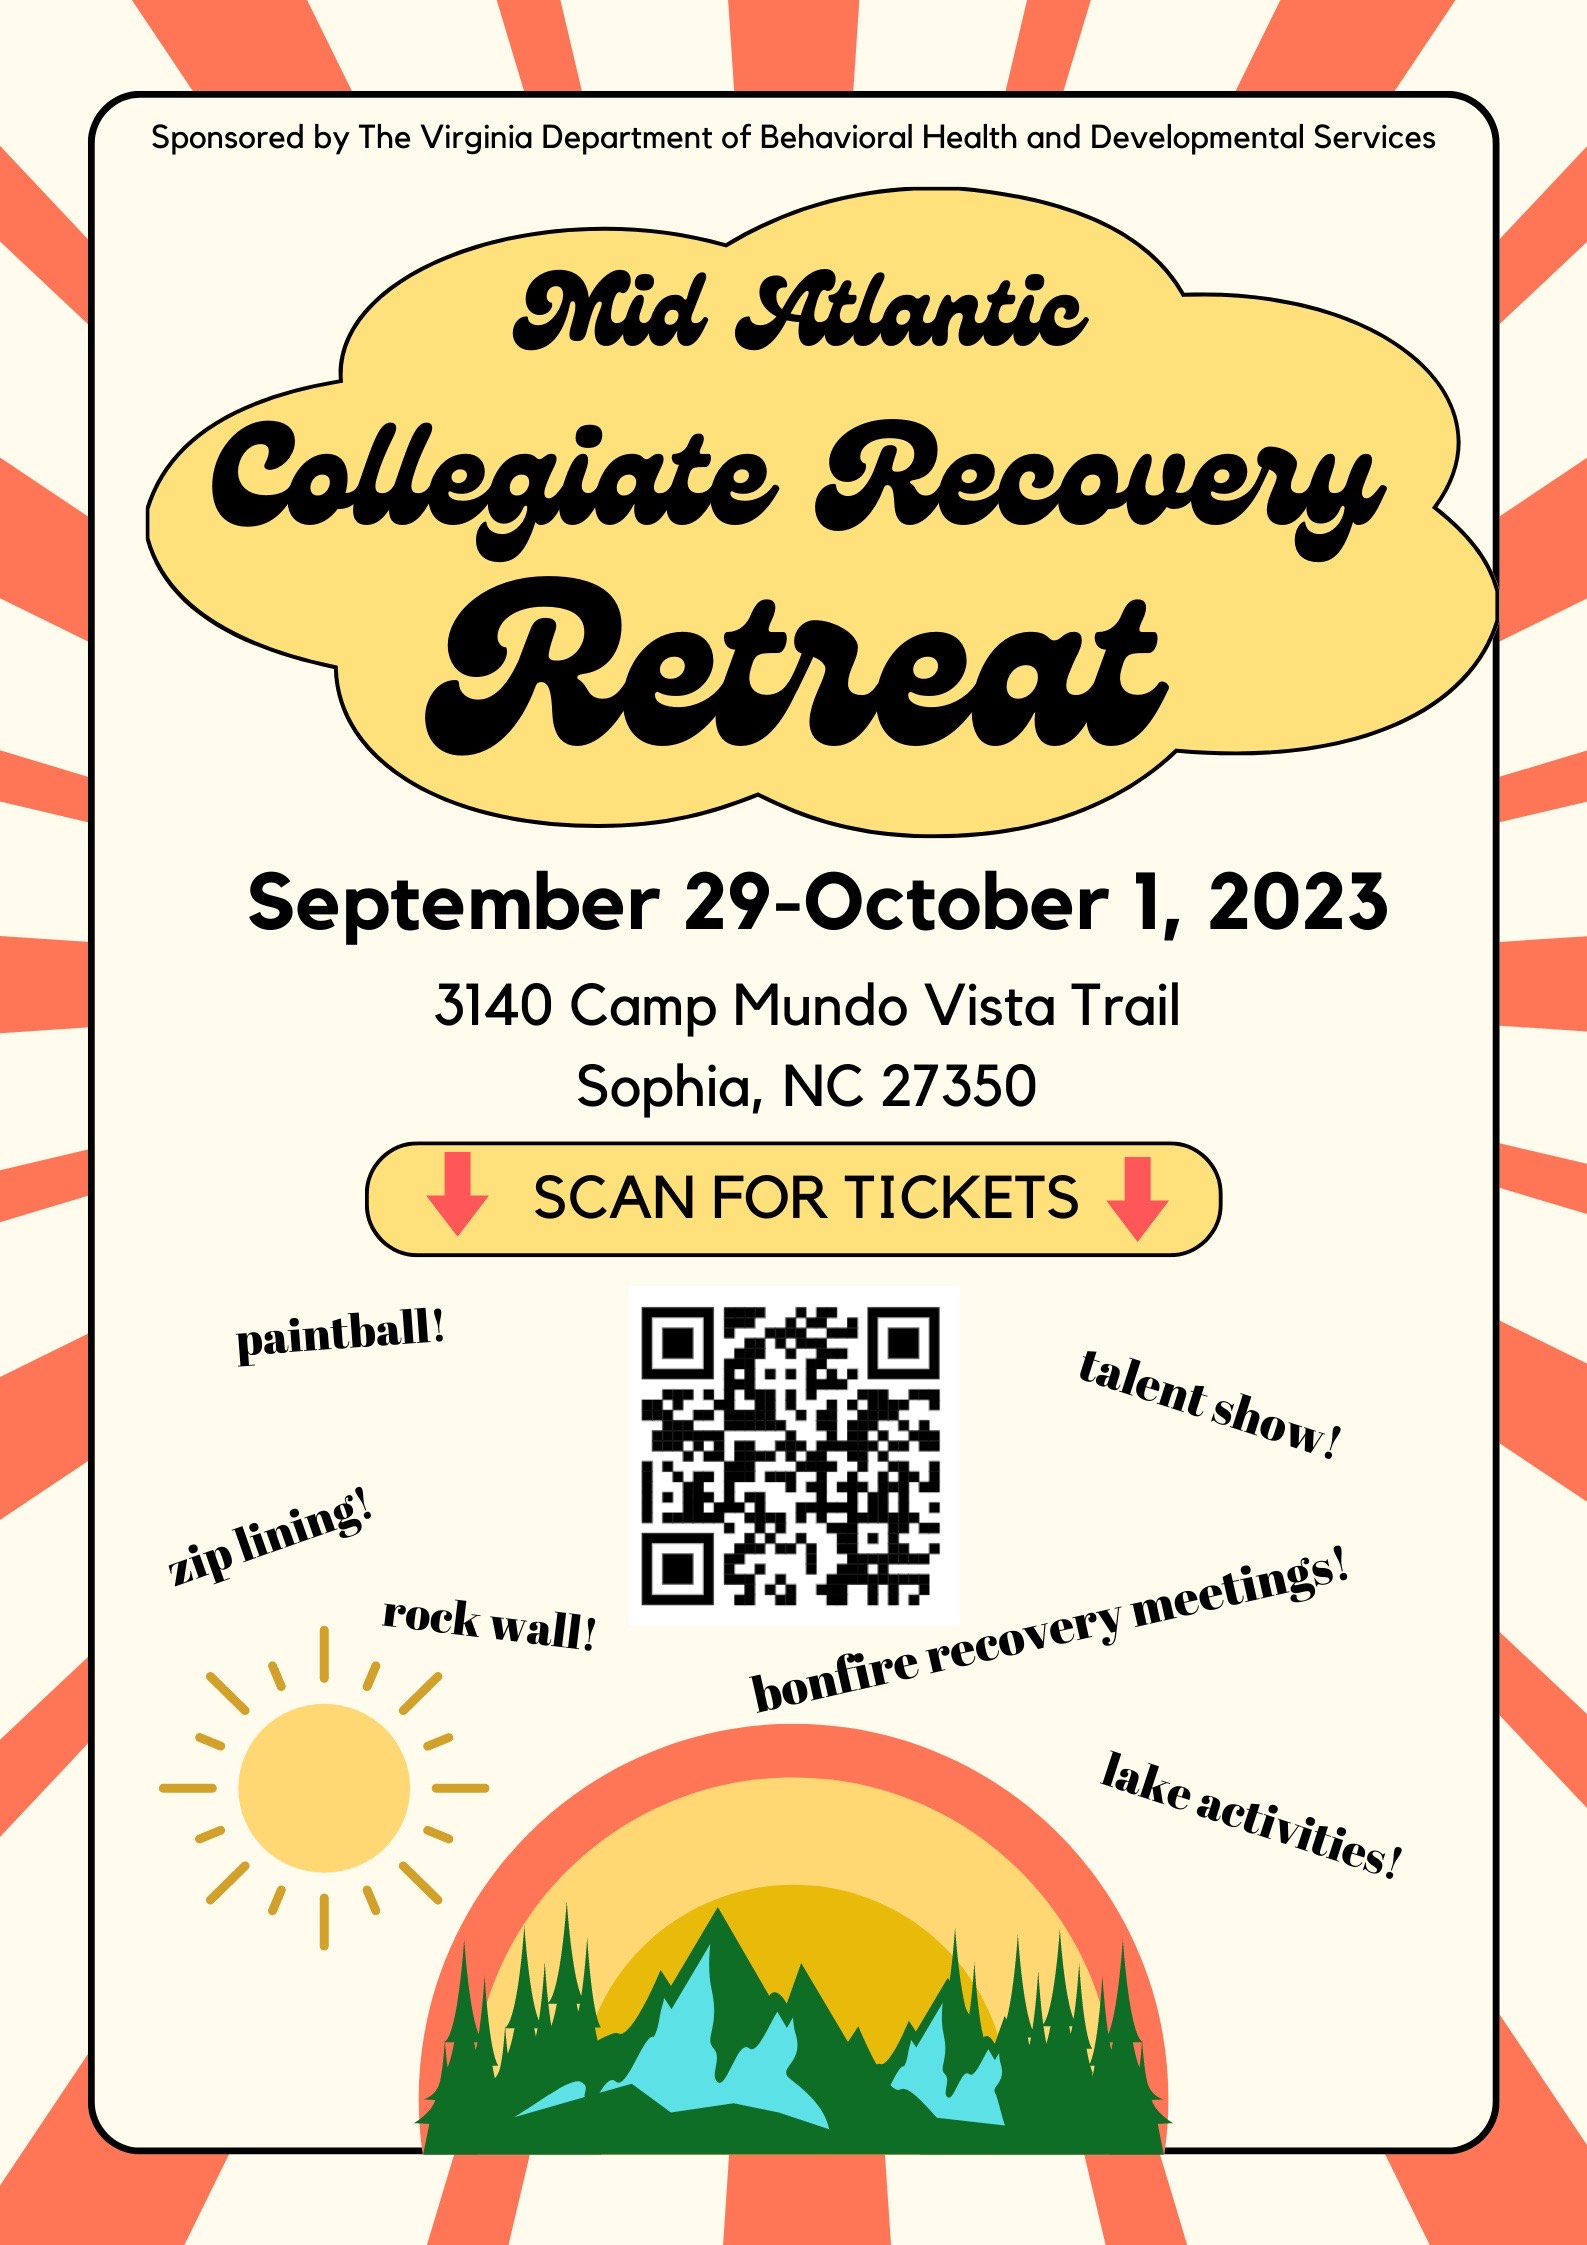 Full Size Mid-Atlantic Collegiate Recovery Retreat Poster available for download for event information and qr code.